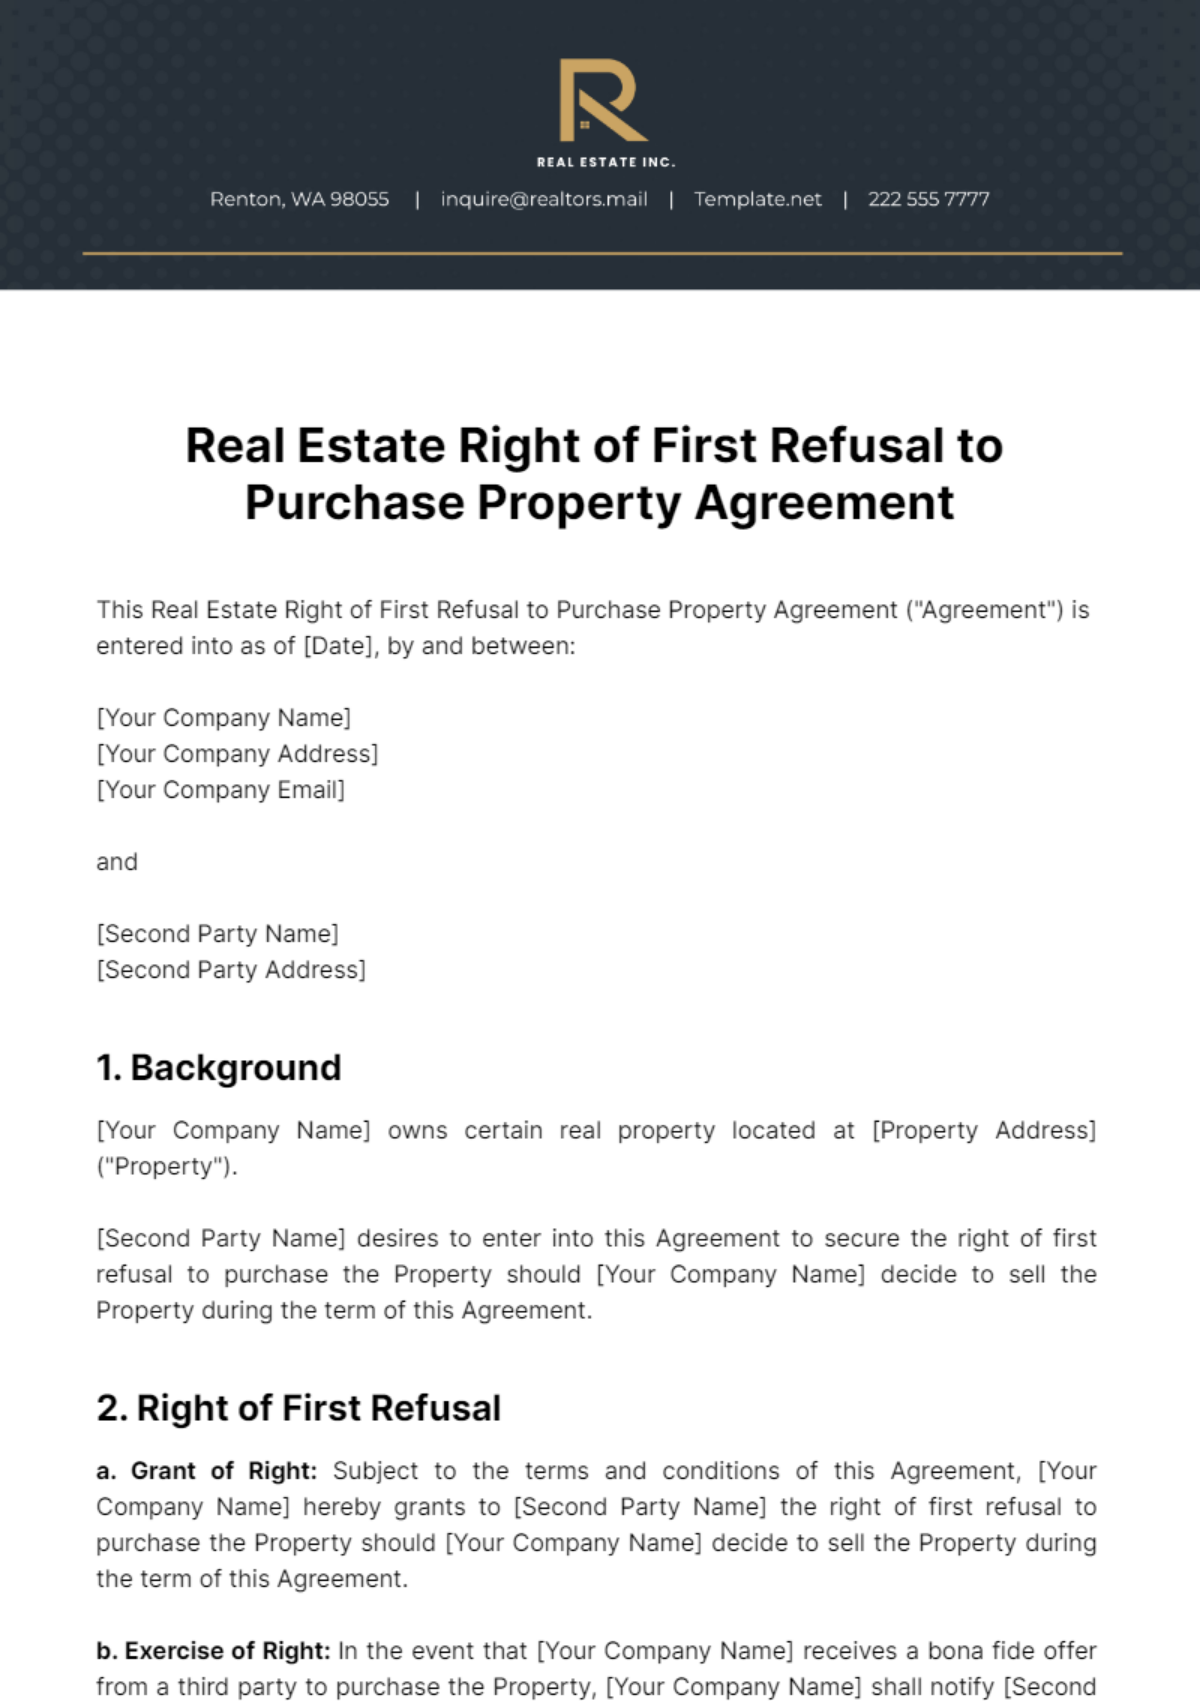 Free Real Estate Right of First Refusal to Purchase Property Agreement Template